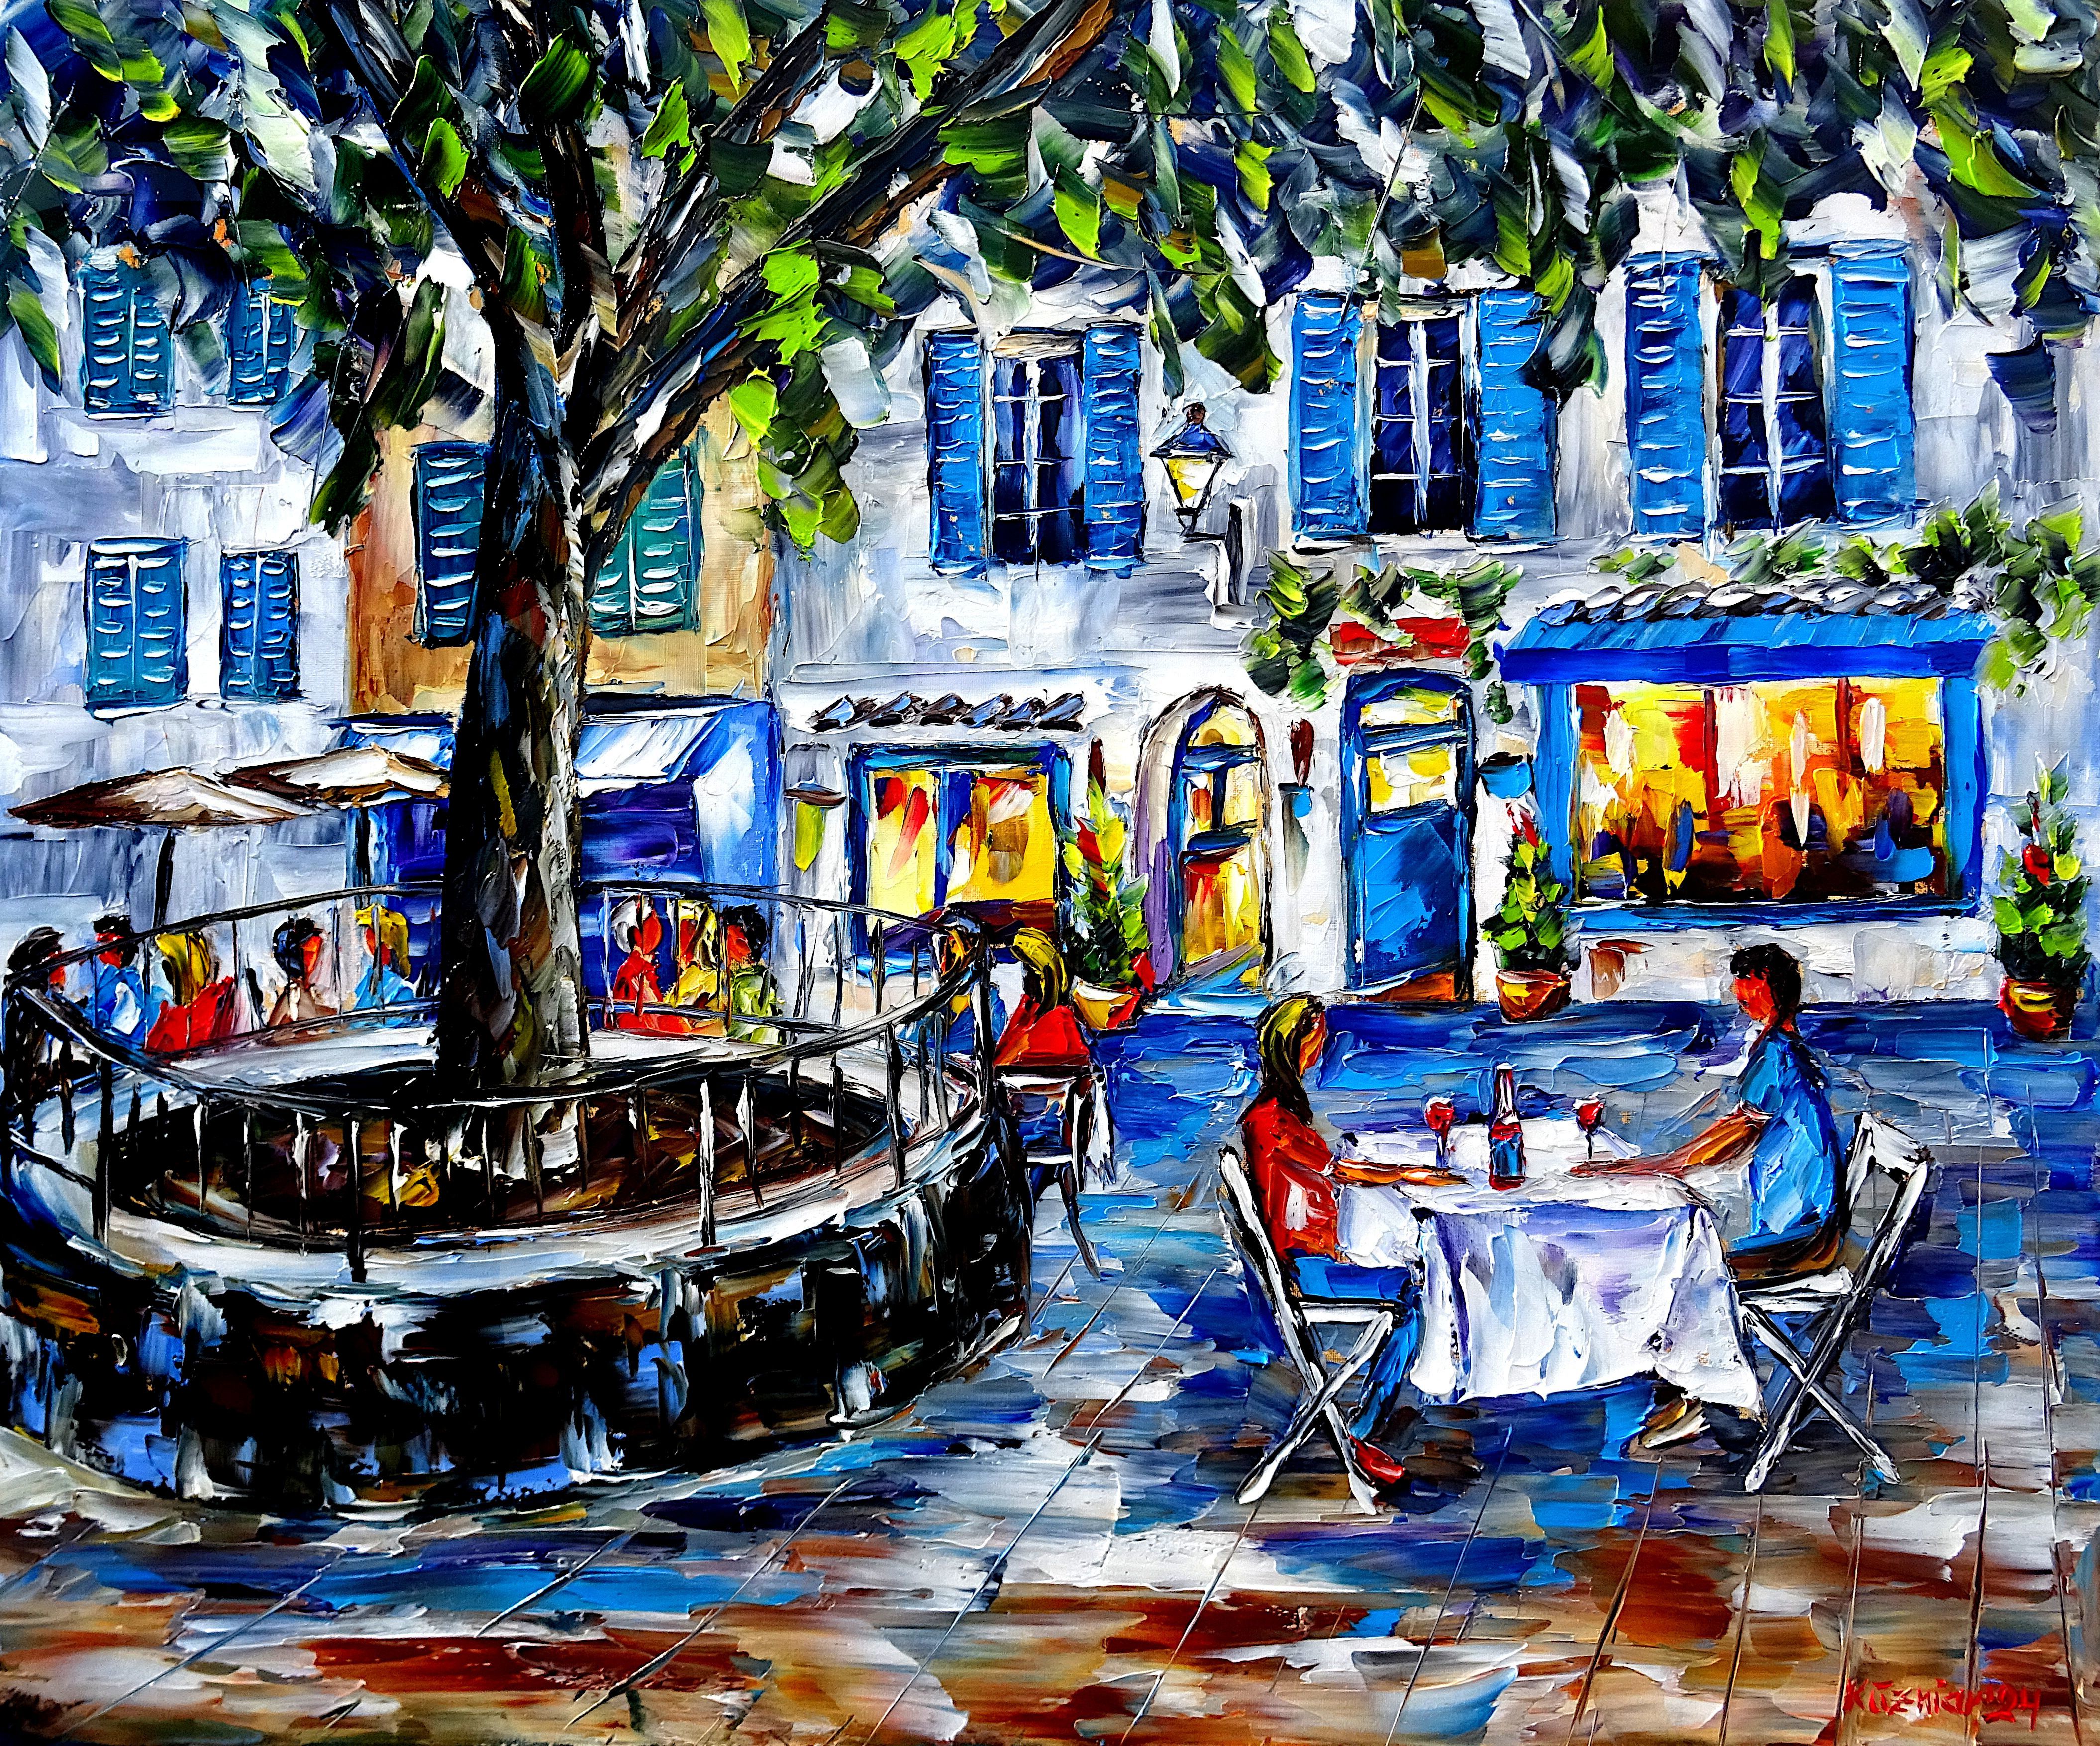 Saint-Tropez,summer in Saint-Tropez,Saint-Tropez café,people in the café,in the café outside,lovers at the table,drinking red wine,street café in Saint-Tropez,sitting under the tree,in the early evening,light from the window,light in the window,evening mood,summer evening,Côte d'Azur,southern France,Provence,summer in southern France,summer in Provence,Saint-Tropez cityscape,Saint-Tropez city scene,summer feelings,summer picture,summer painting,summer colors,Saint-Tropez in summer,People in Saint-Tropez,people in summer,France love,beautiful Provence,colors of Provence,
Provence idyll,Saint-Tropez painting,Saint-Tropez picture,palette knife oil painting,expressive art,expressive painting,expressionism,lively colors,
colorful painting,impasto painting,figurative